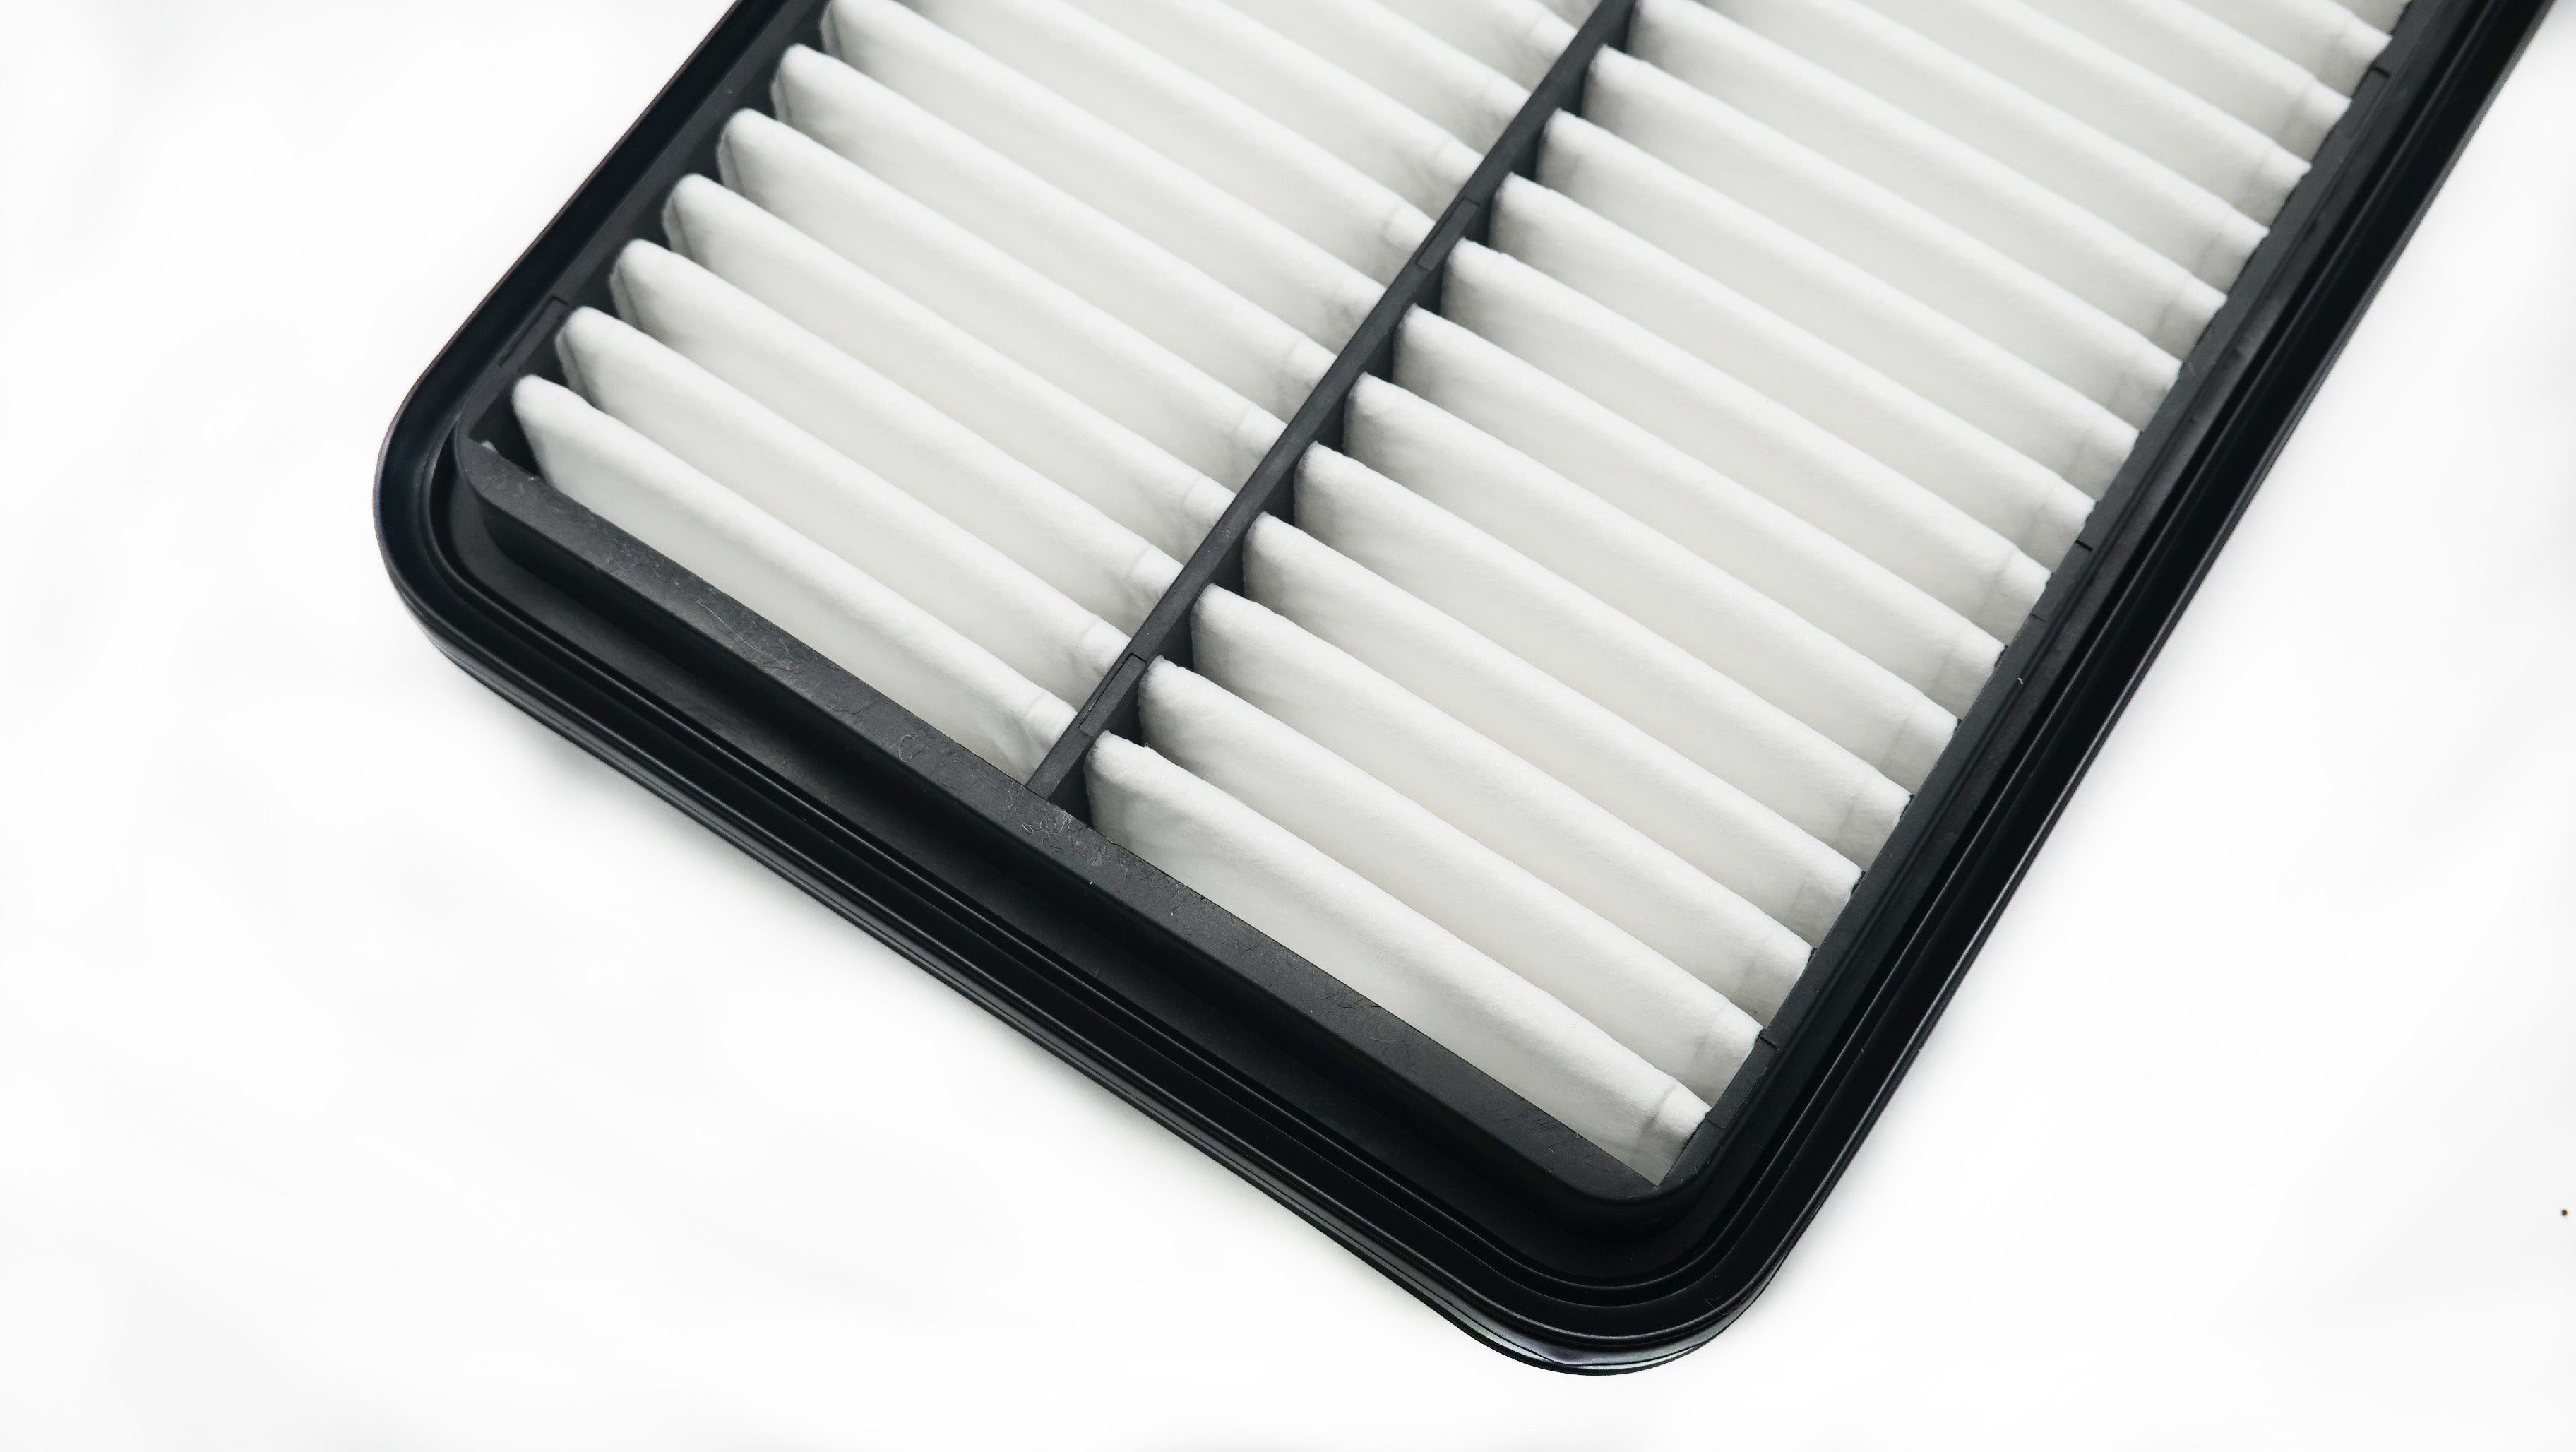 S&T Air conditioning filter Hot Deals in African High Quality Air conditioning filter for 2003-2021 Hyundai cars